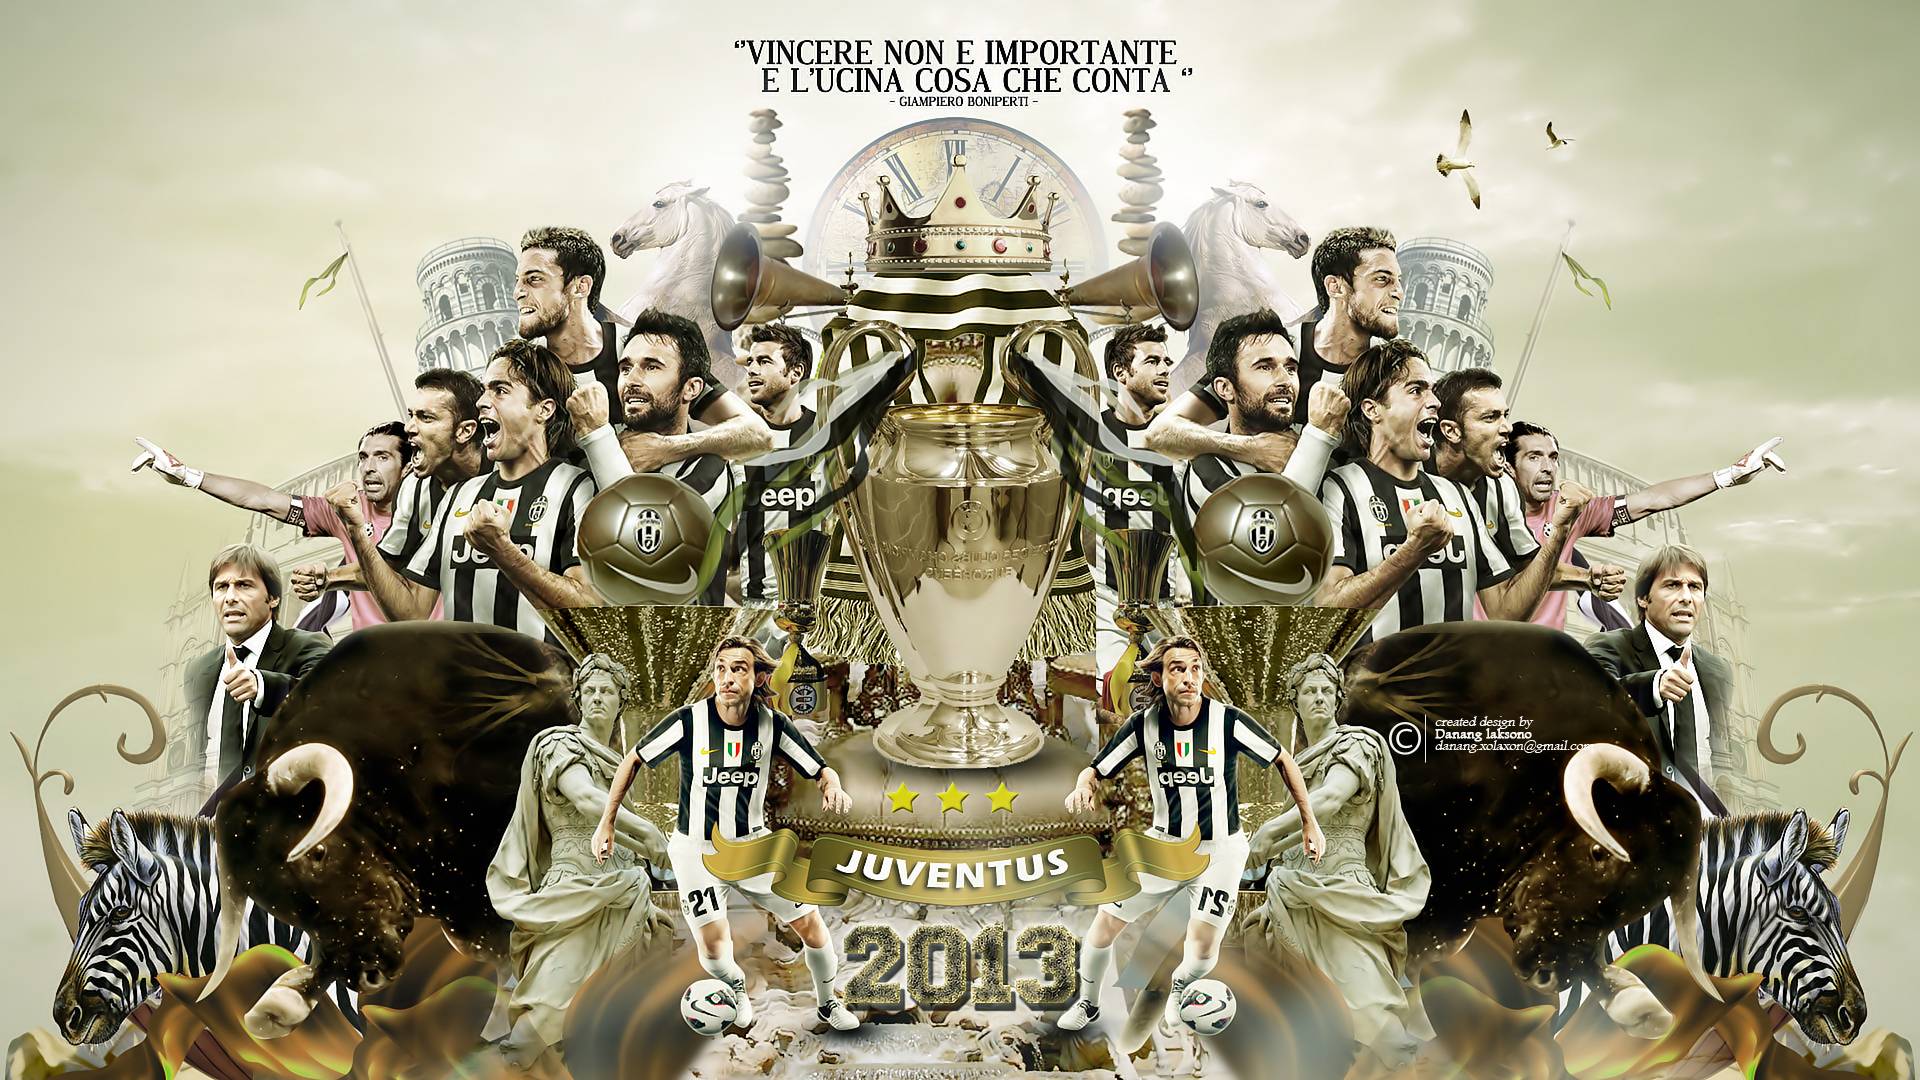 Juventus HD Wallpaper for Desktop, iPhone, iPad, and Android